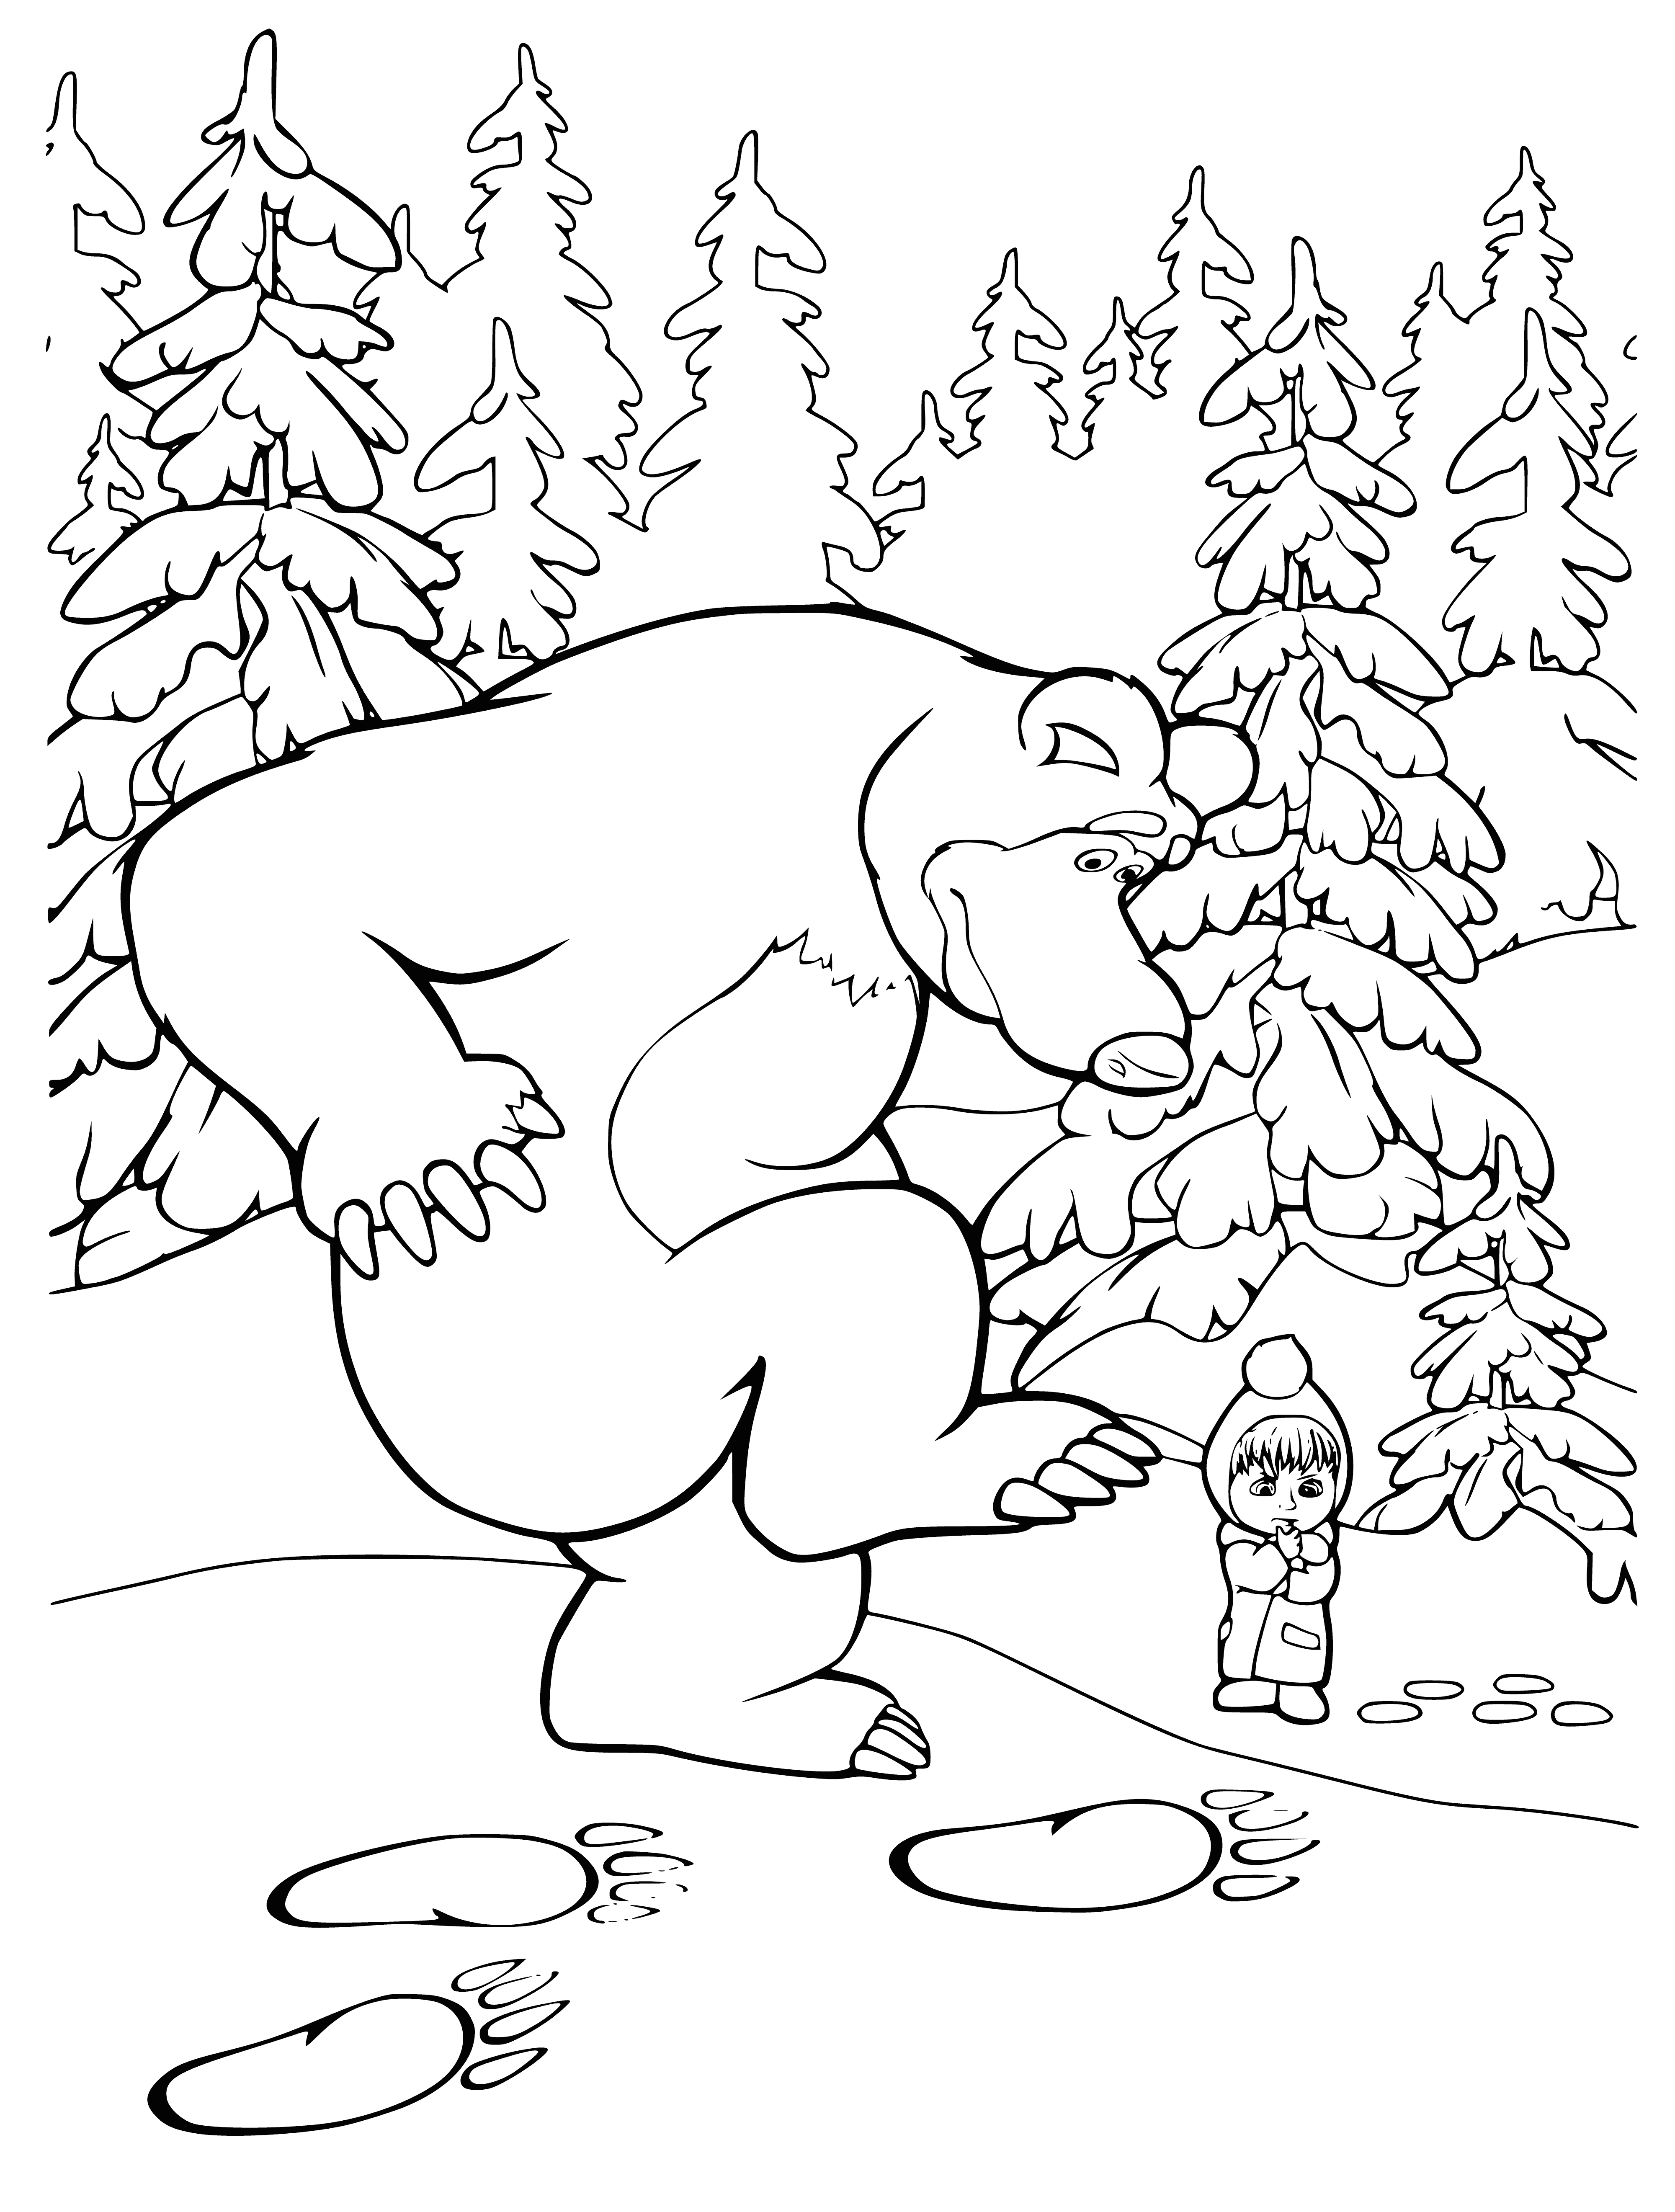 coloring page: Snowy landscape w/ trees, cabin, animal tracks; large & small animals stand in door, one brown, one brown & white, looking curiously.